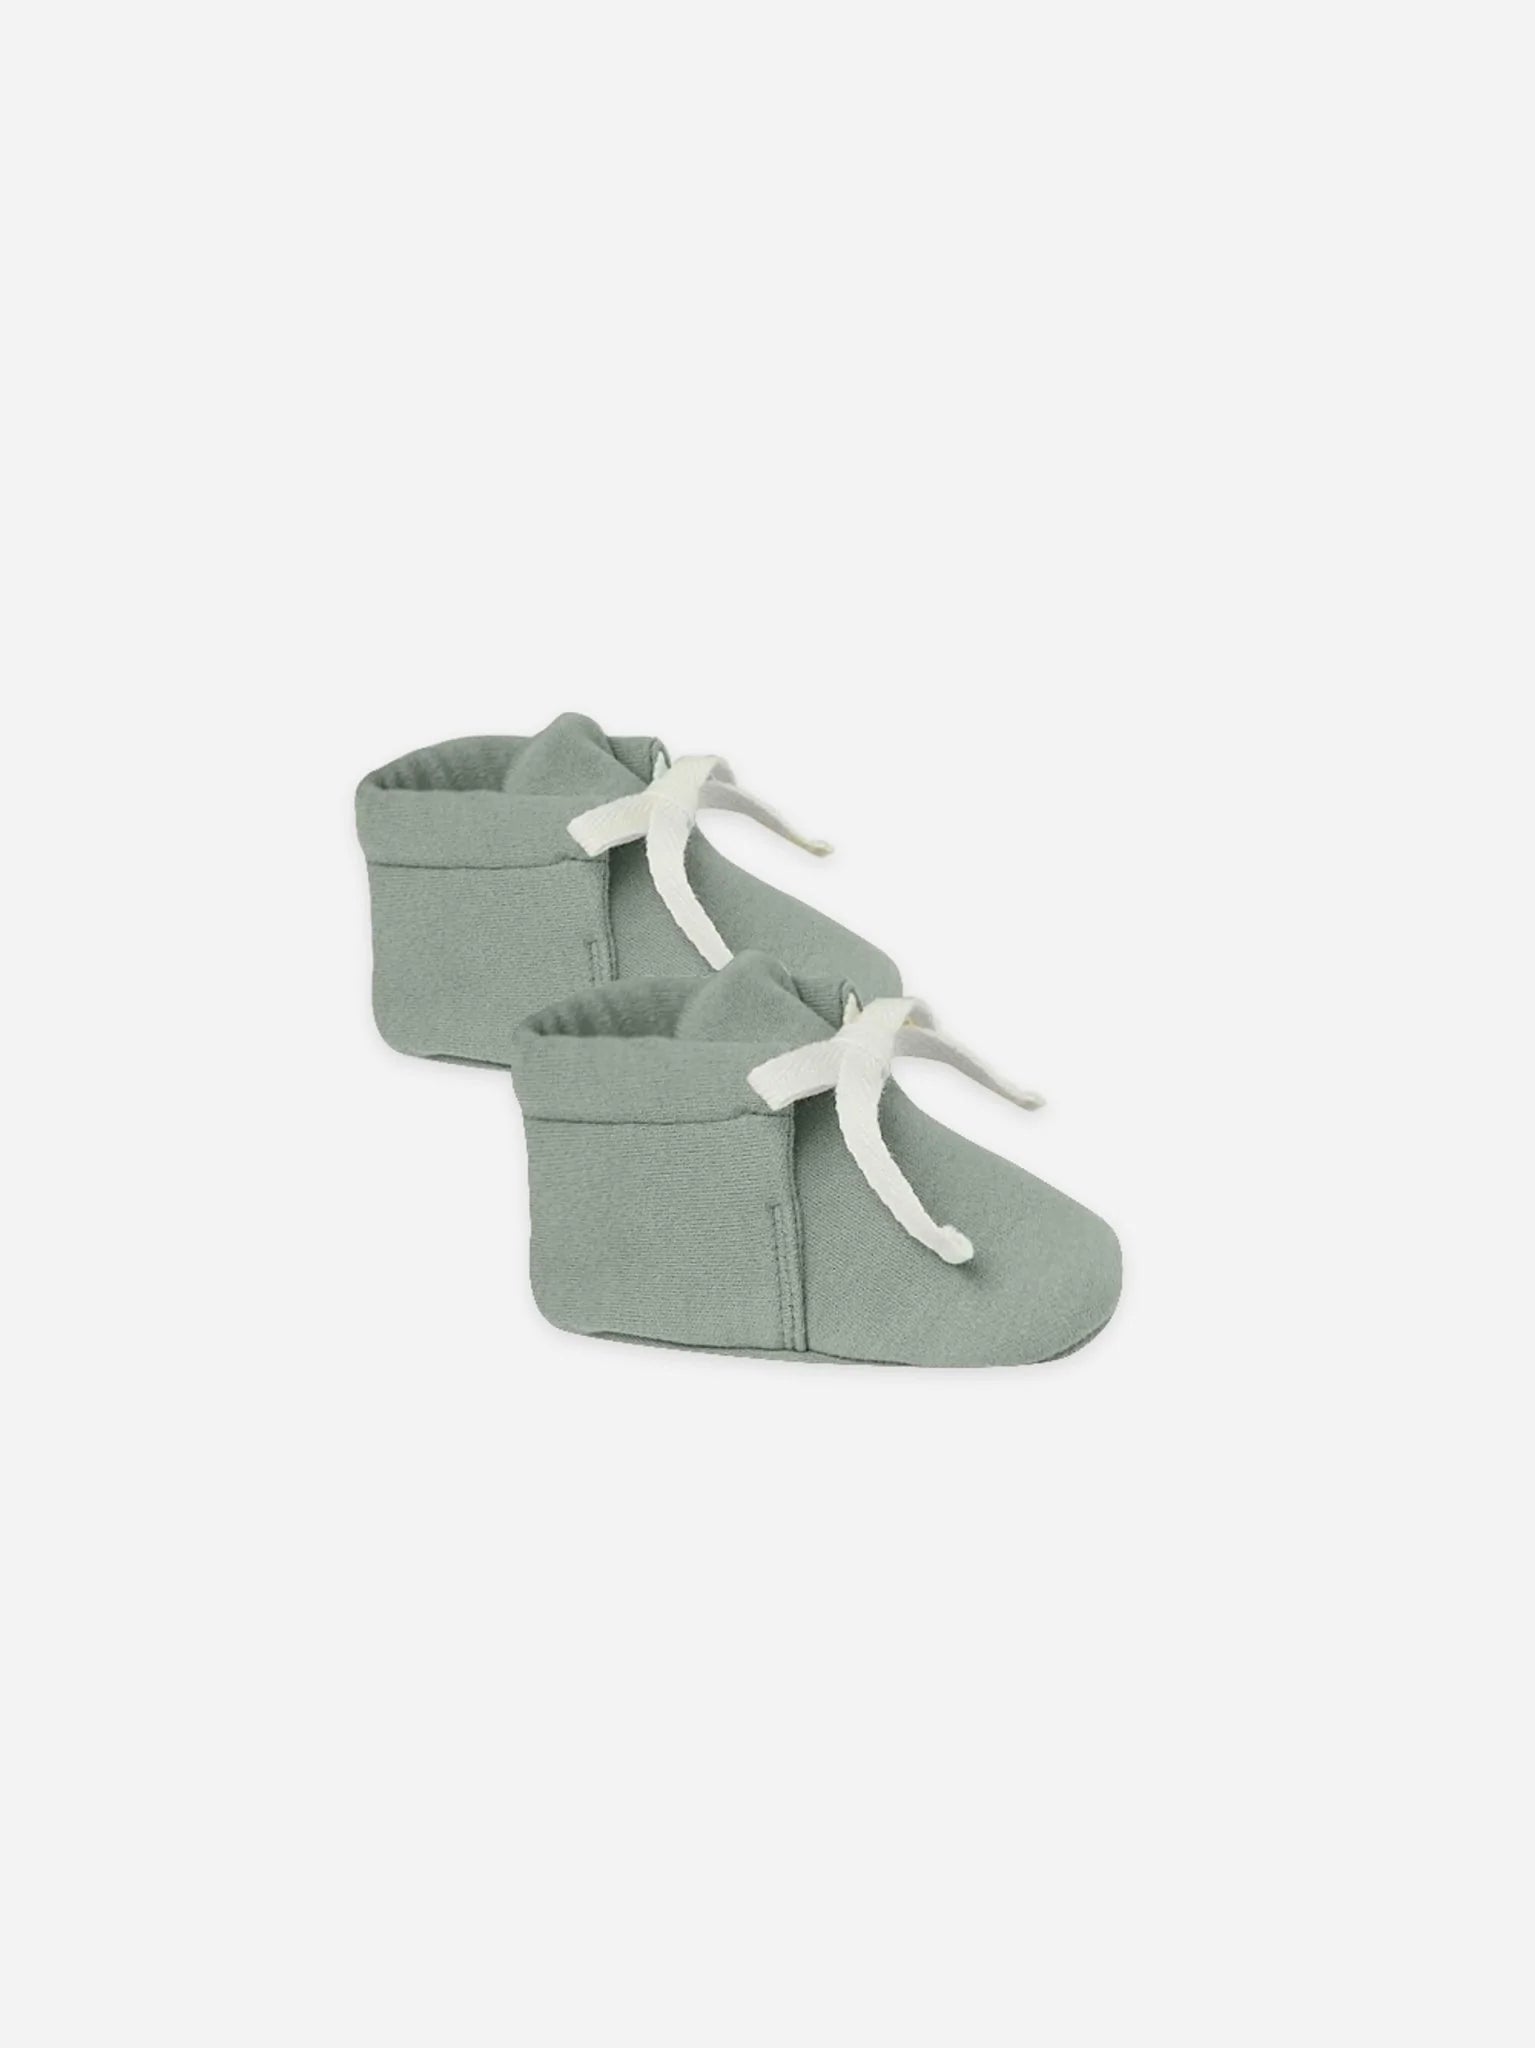 Quincy Mae Baby Booties - Spruce